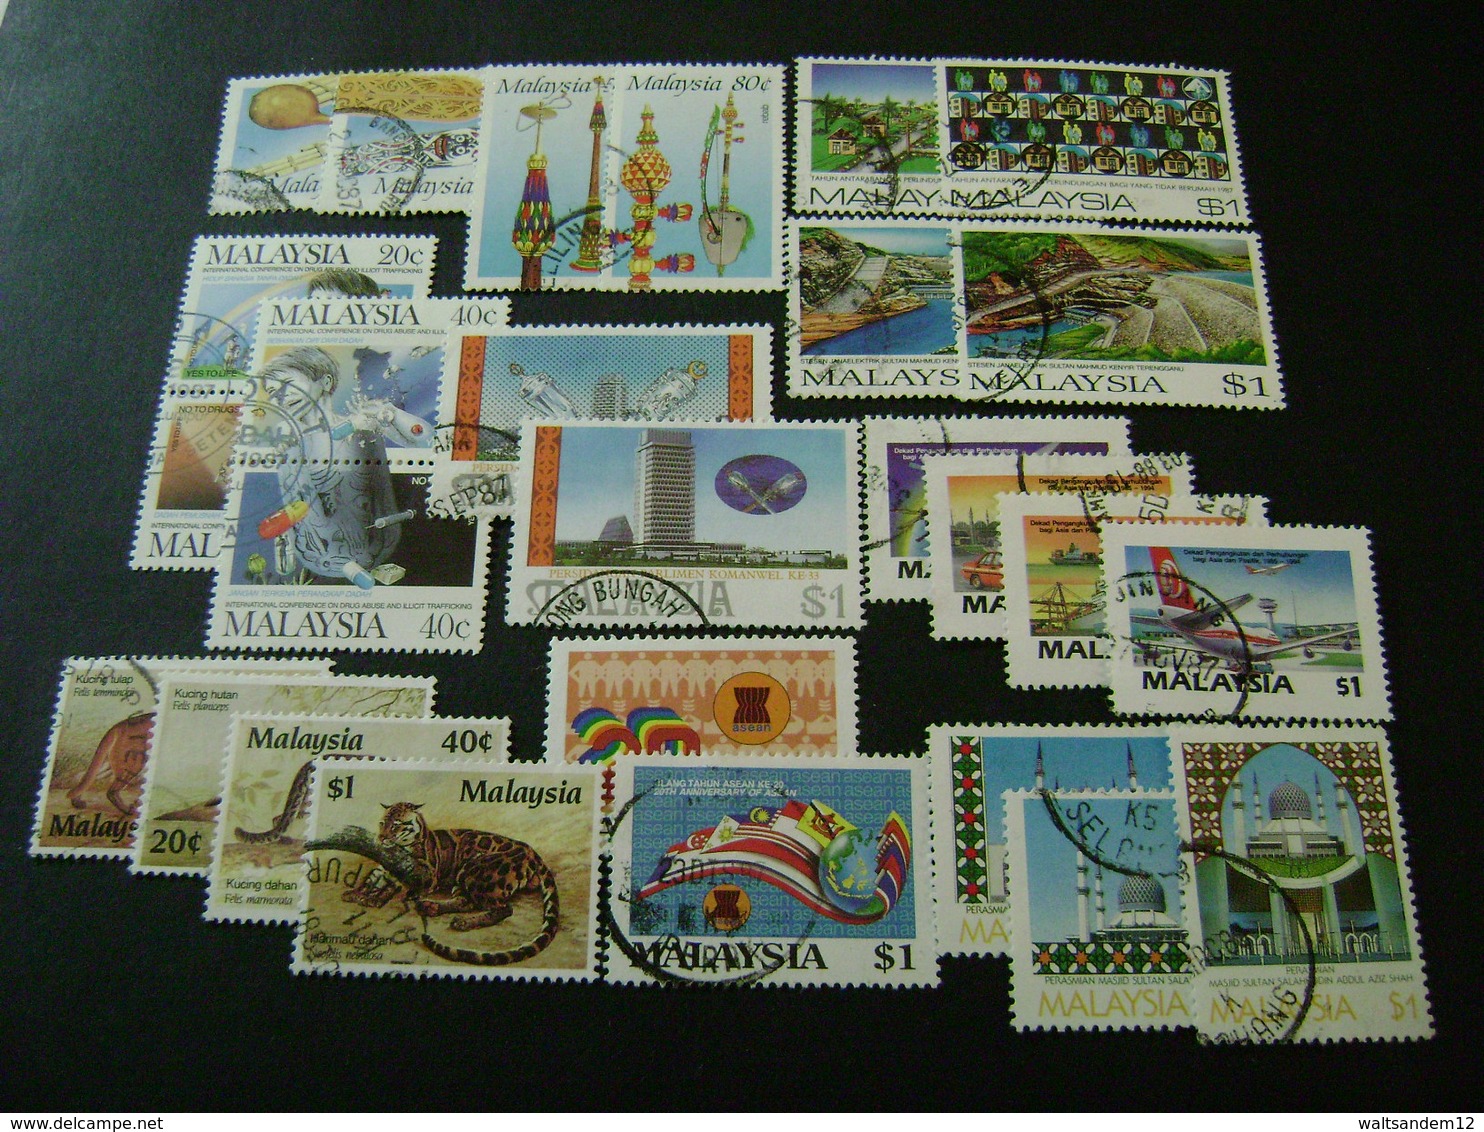 Malaysia 1986-1989 Complete Stamp Issues (SG 331-431) 4 Images - Used - Malaysia (1964-...)